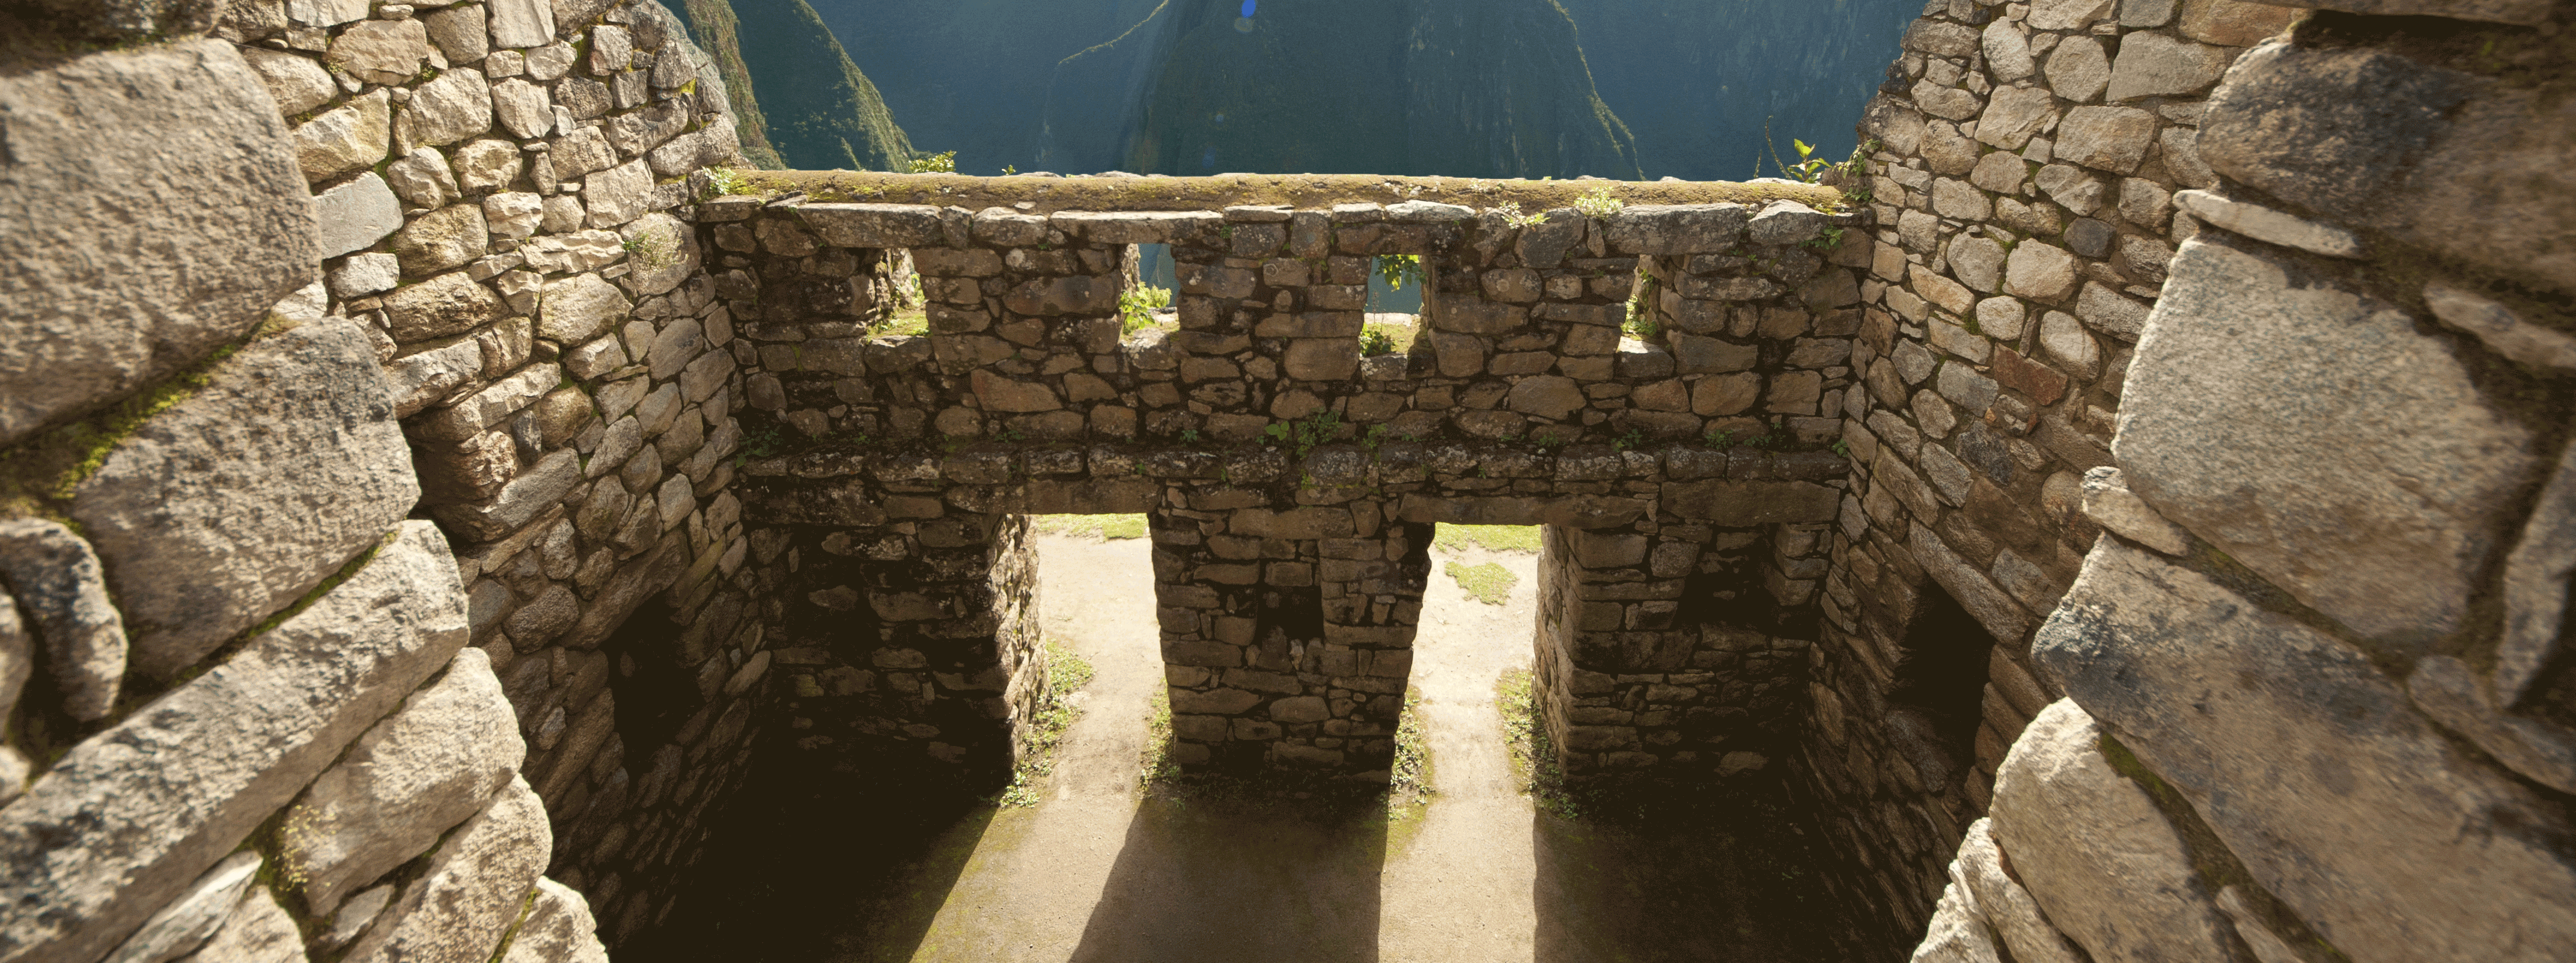 /resource/Images/southamerica/peru/headerimage/Detail-of-Inca-wall-in-the-ancient-city-of-Machu-Picchu,-Peru.png